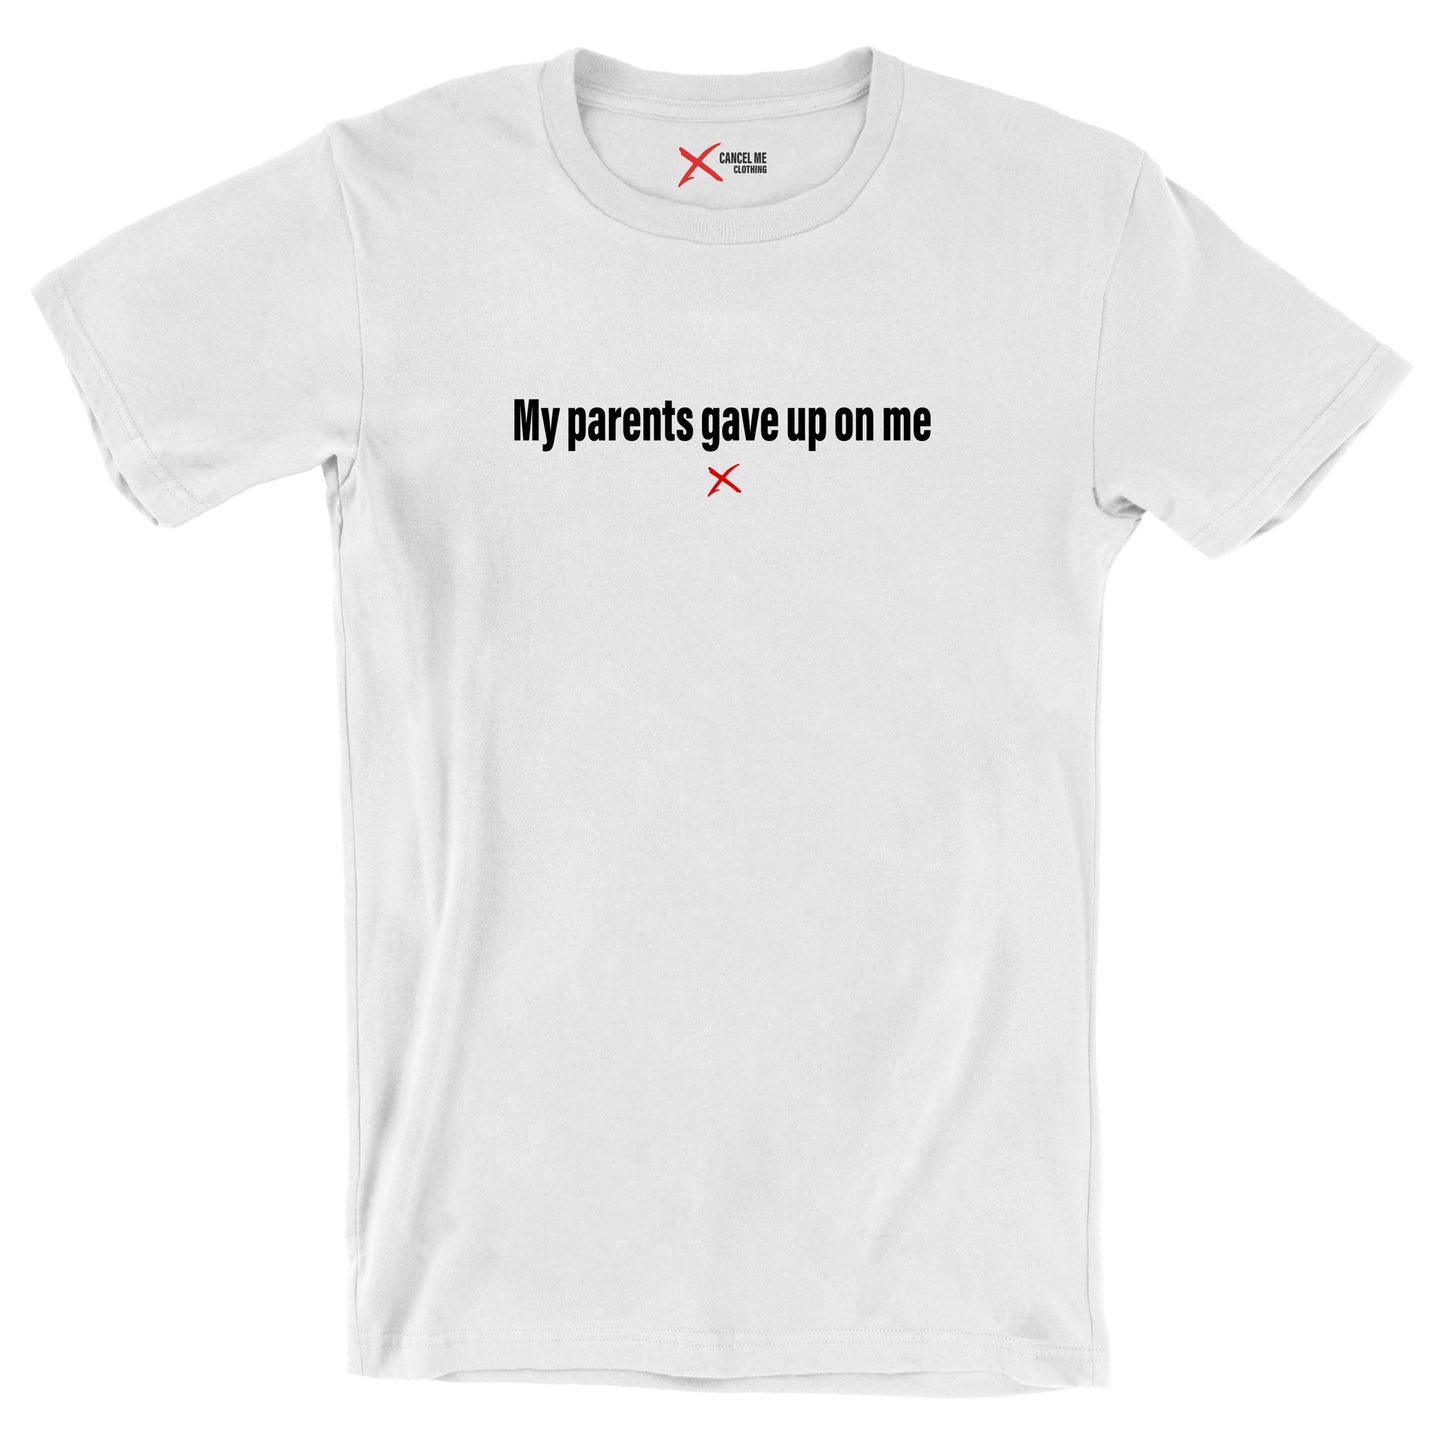 My parents gave up on me - Shirt